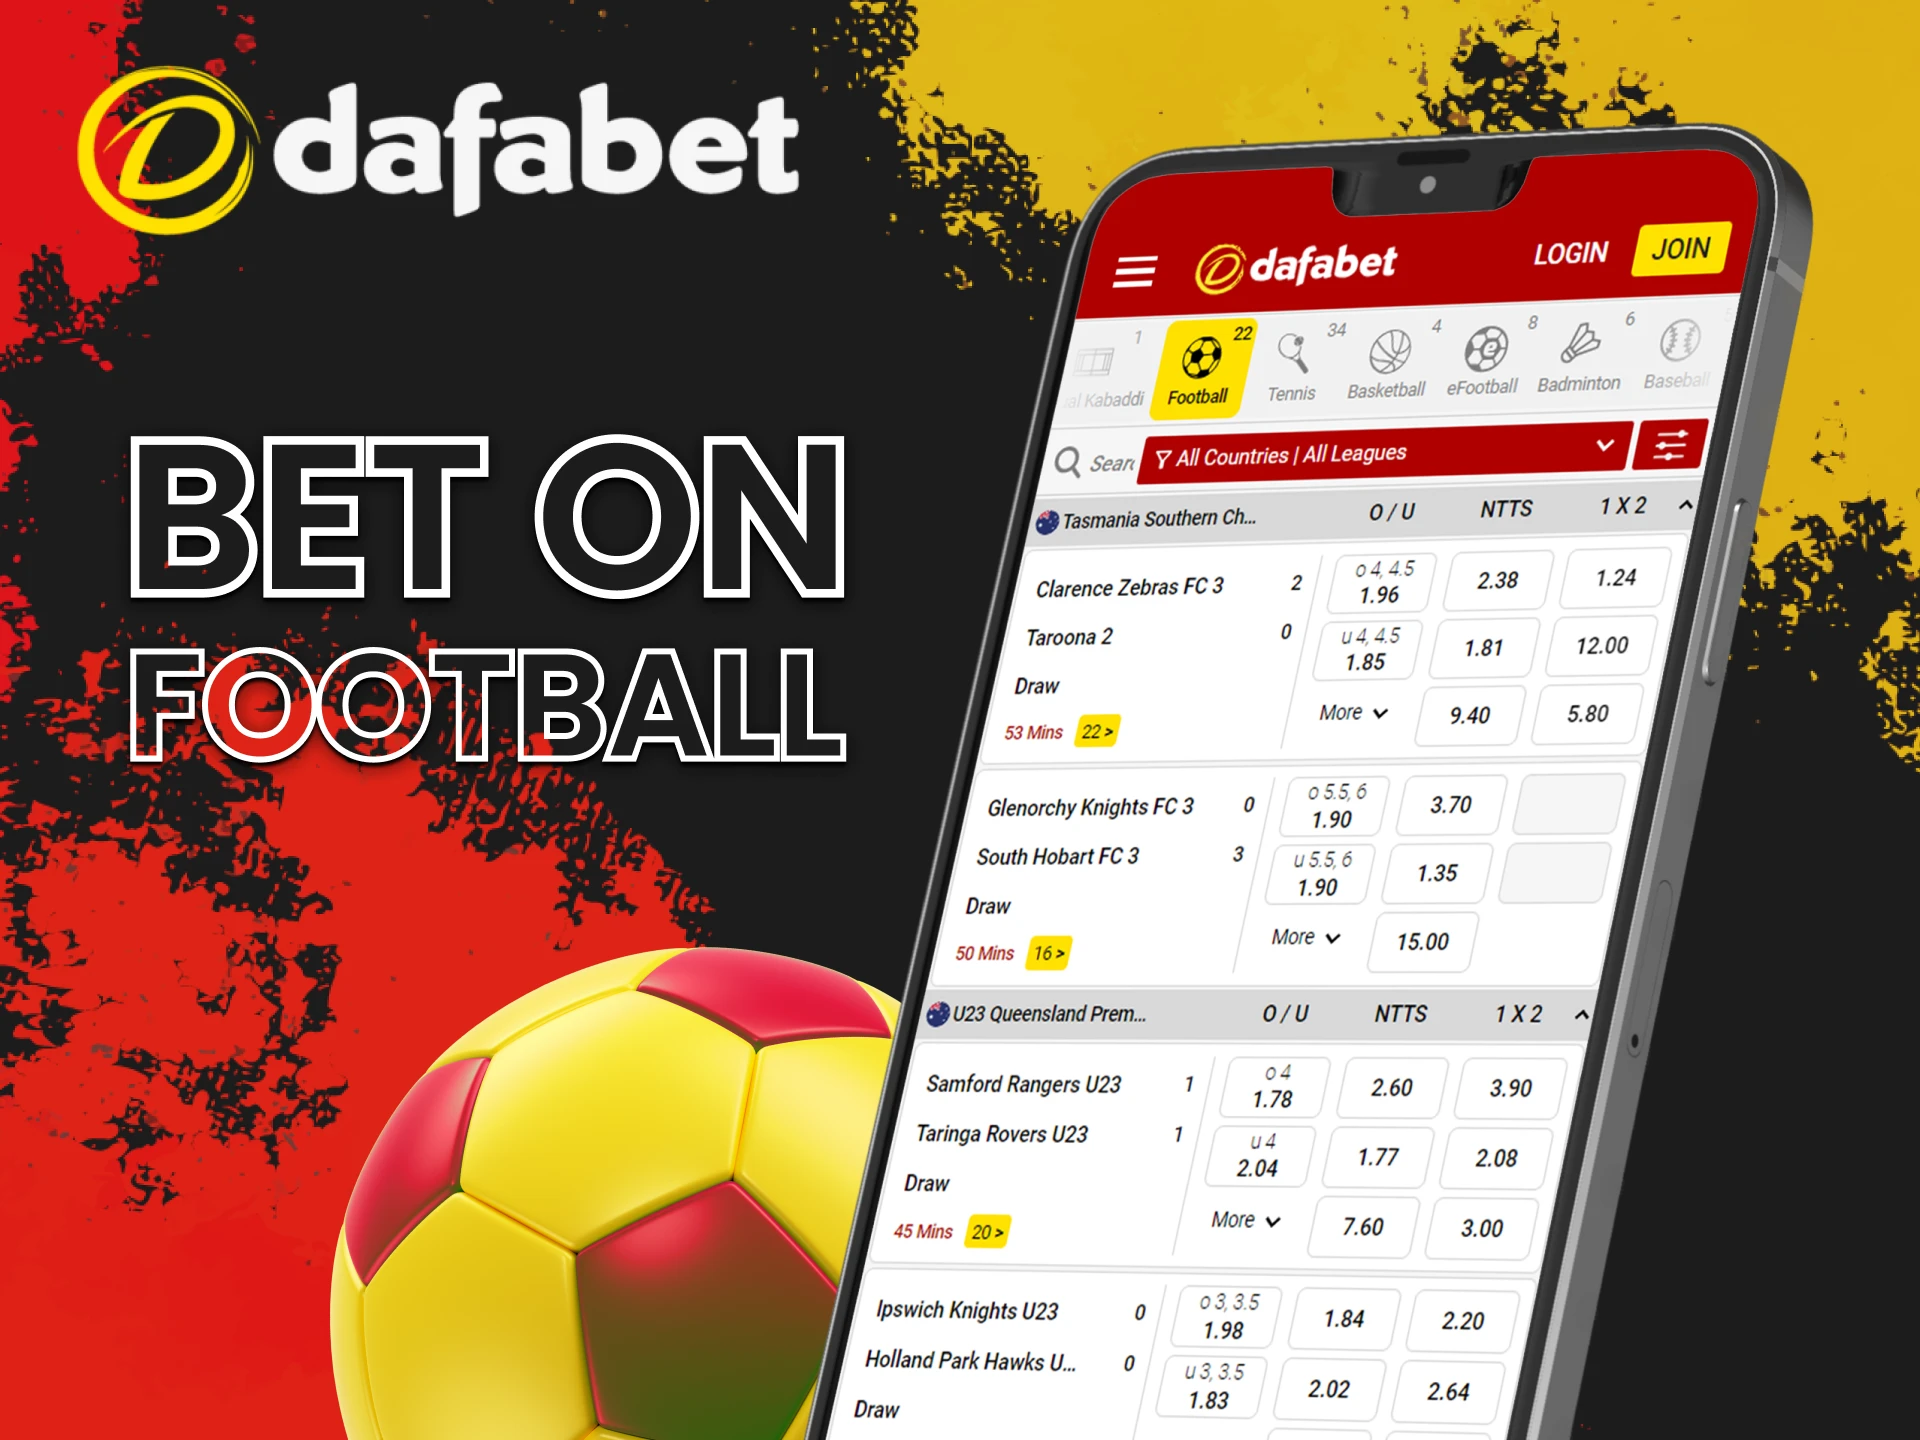 The Dafabet mobile app offers a wide selection of football events for betting.